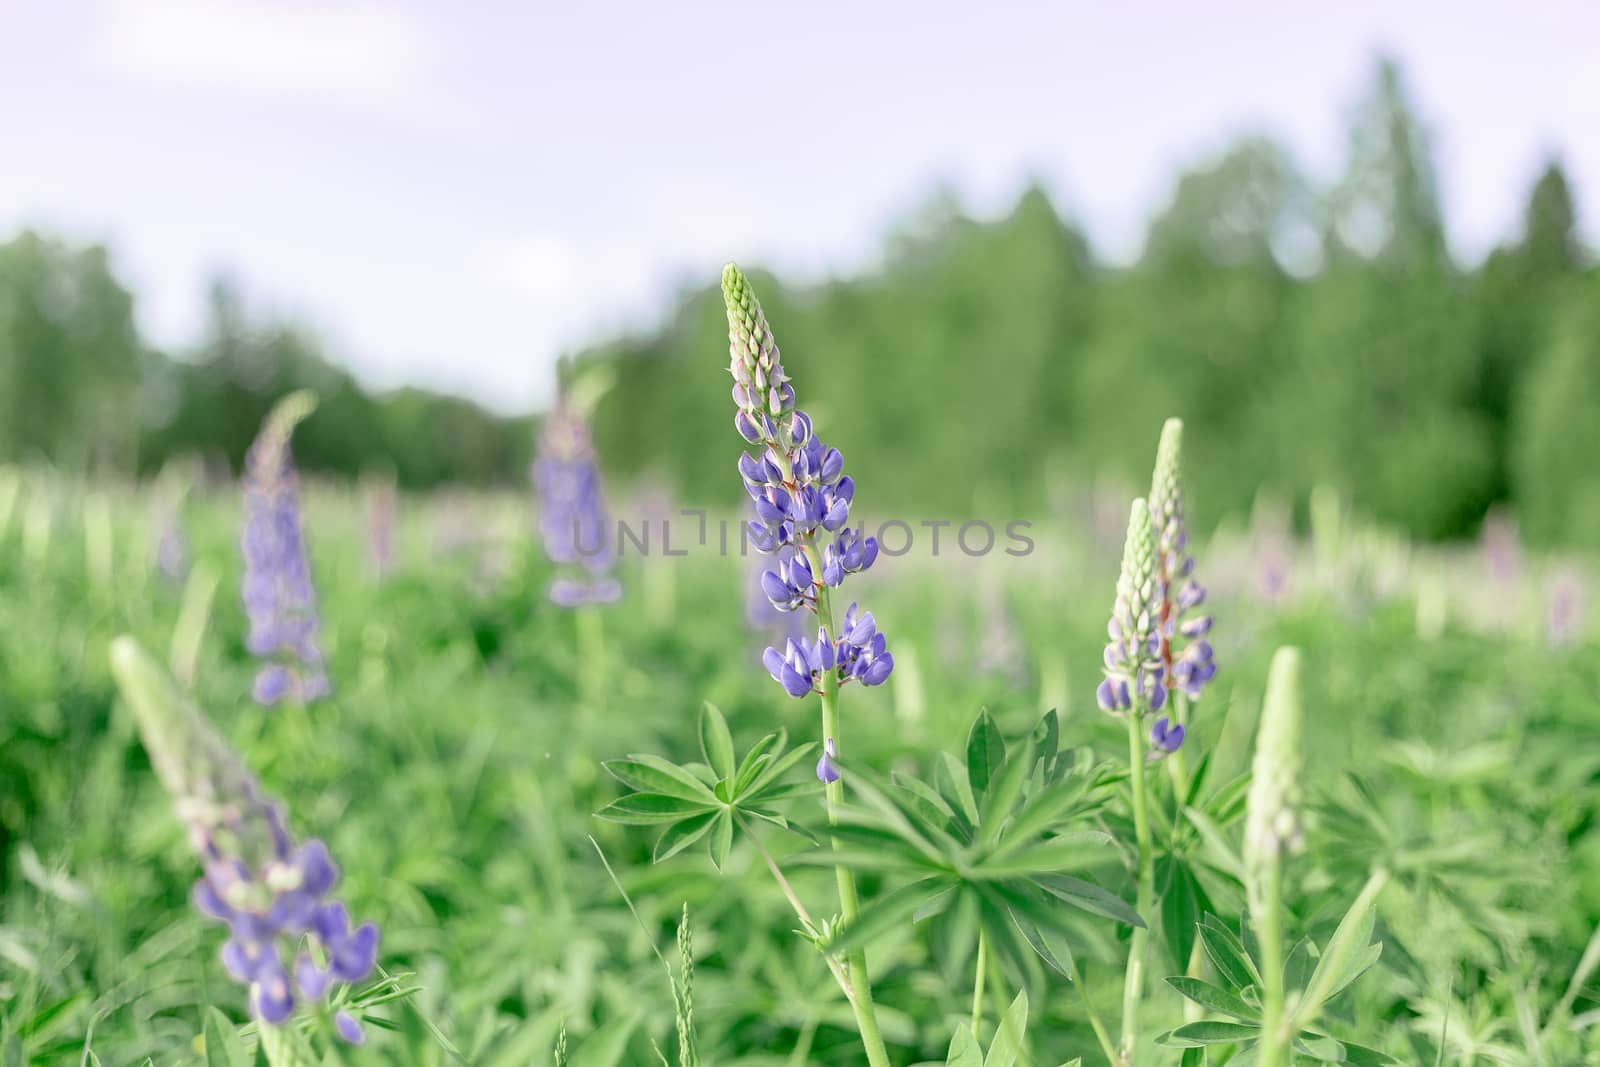 Lupin field with pink purple flowers. Bunch of lupines summer flower background. Blooming lupine flowers. field of lupines. Sunlight shines on plants. Gentle warm soft color. spring and summer flowers by Pirlik